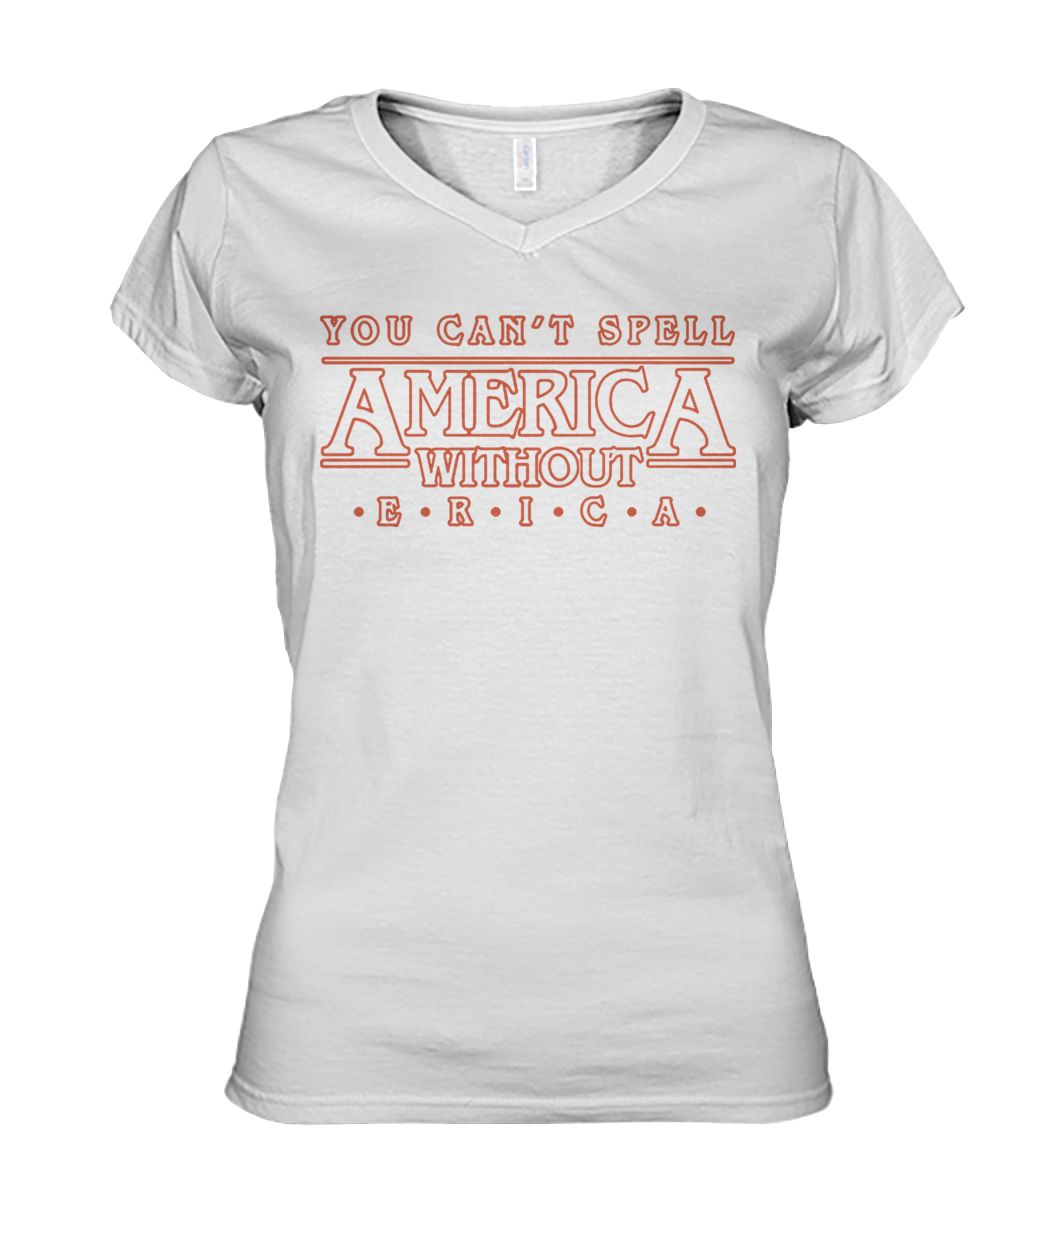 You can't spell america without erica women's v-neck